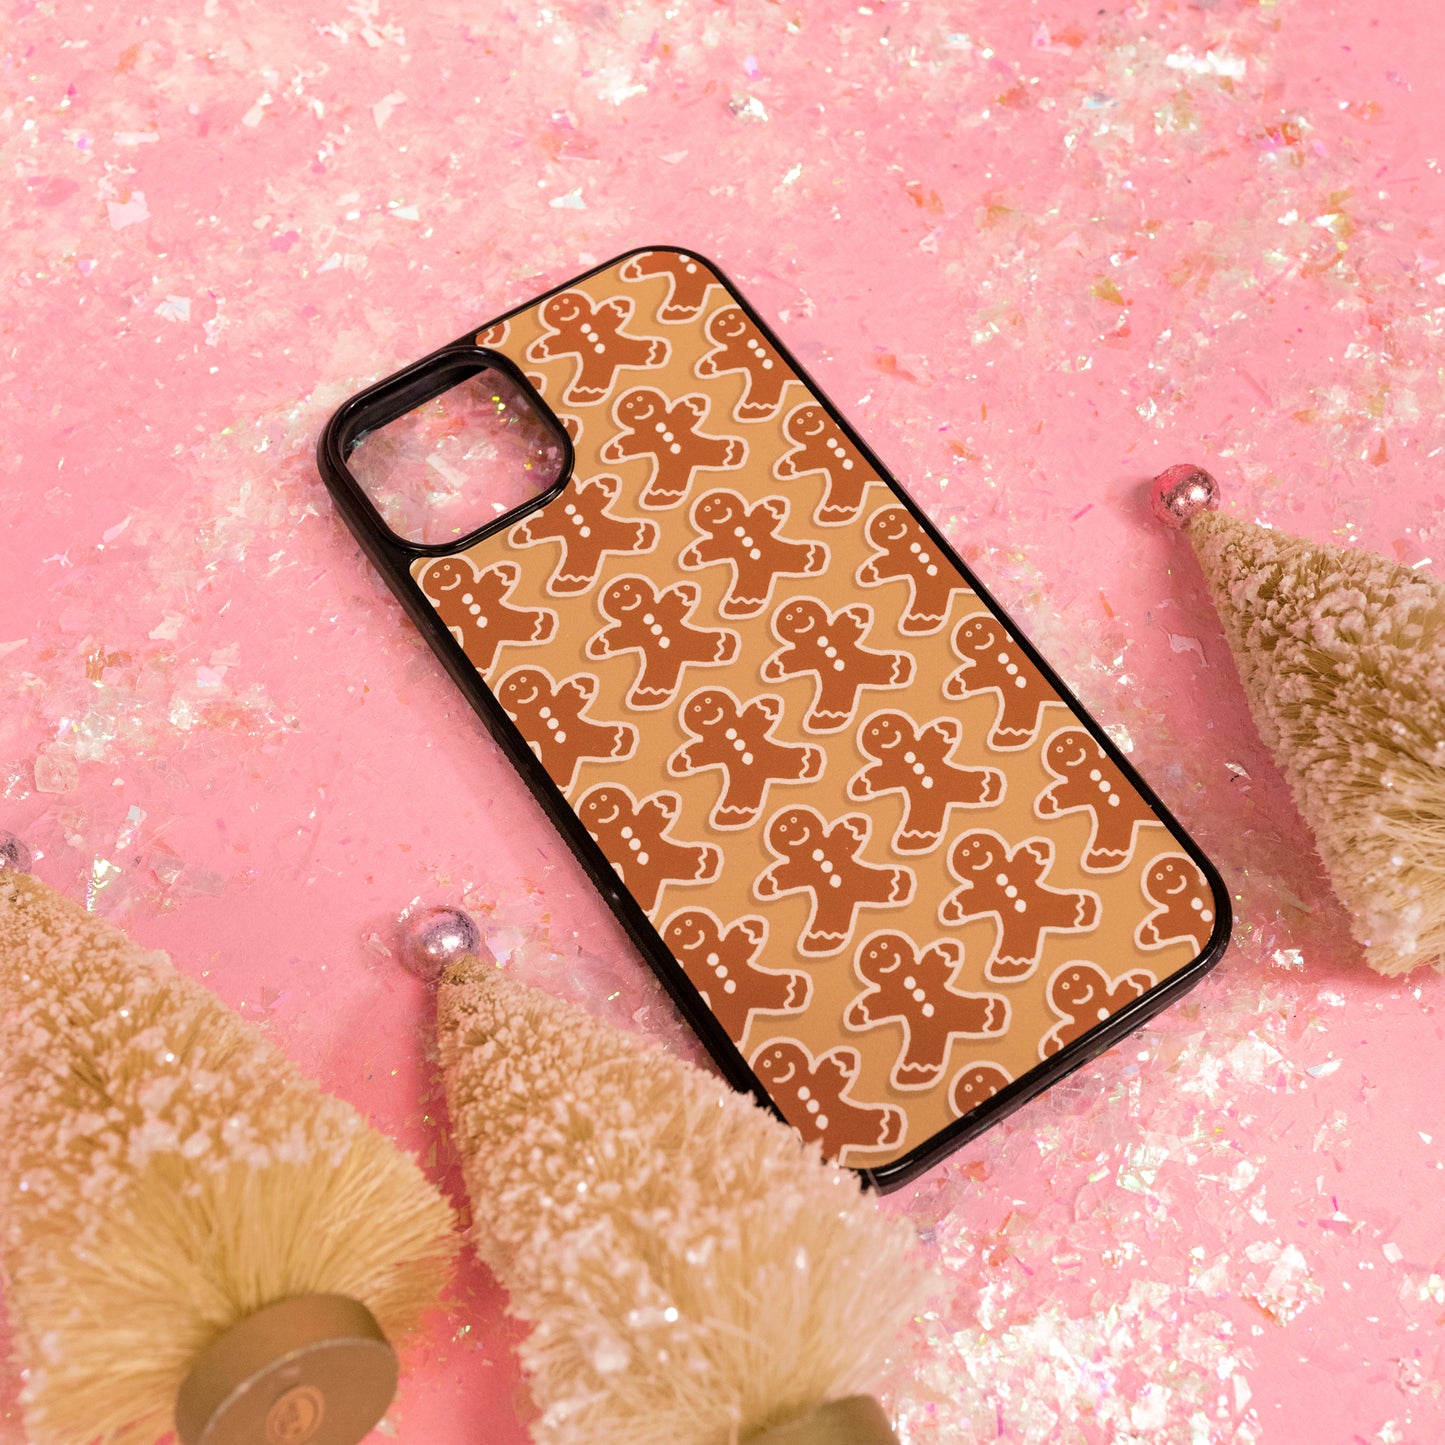 Smiley Gingerbread Man Phone Case - Gasp